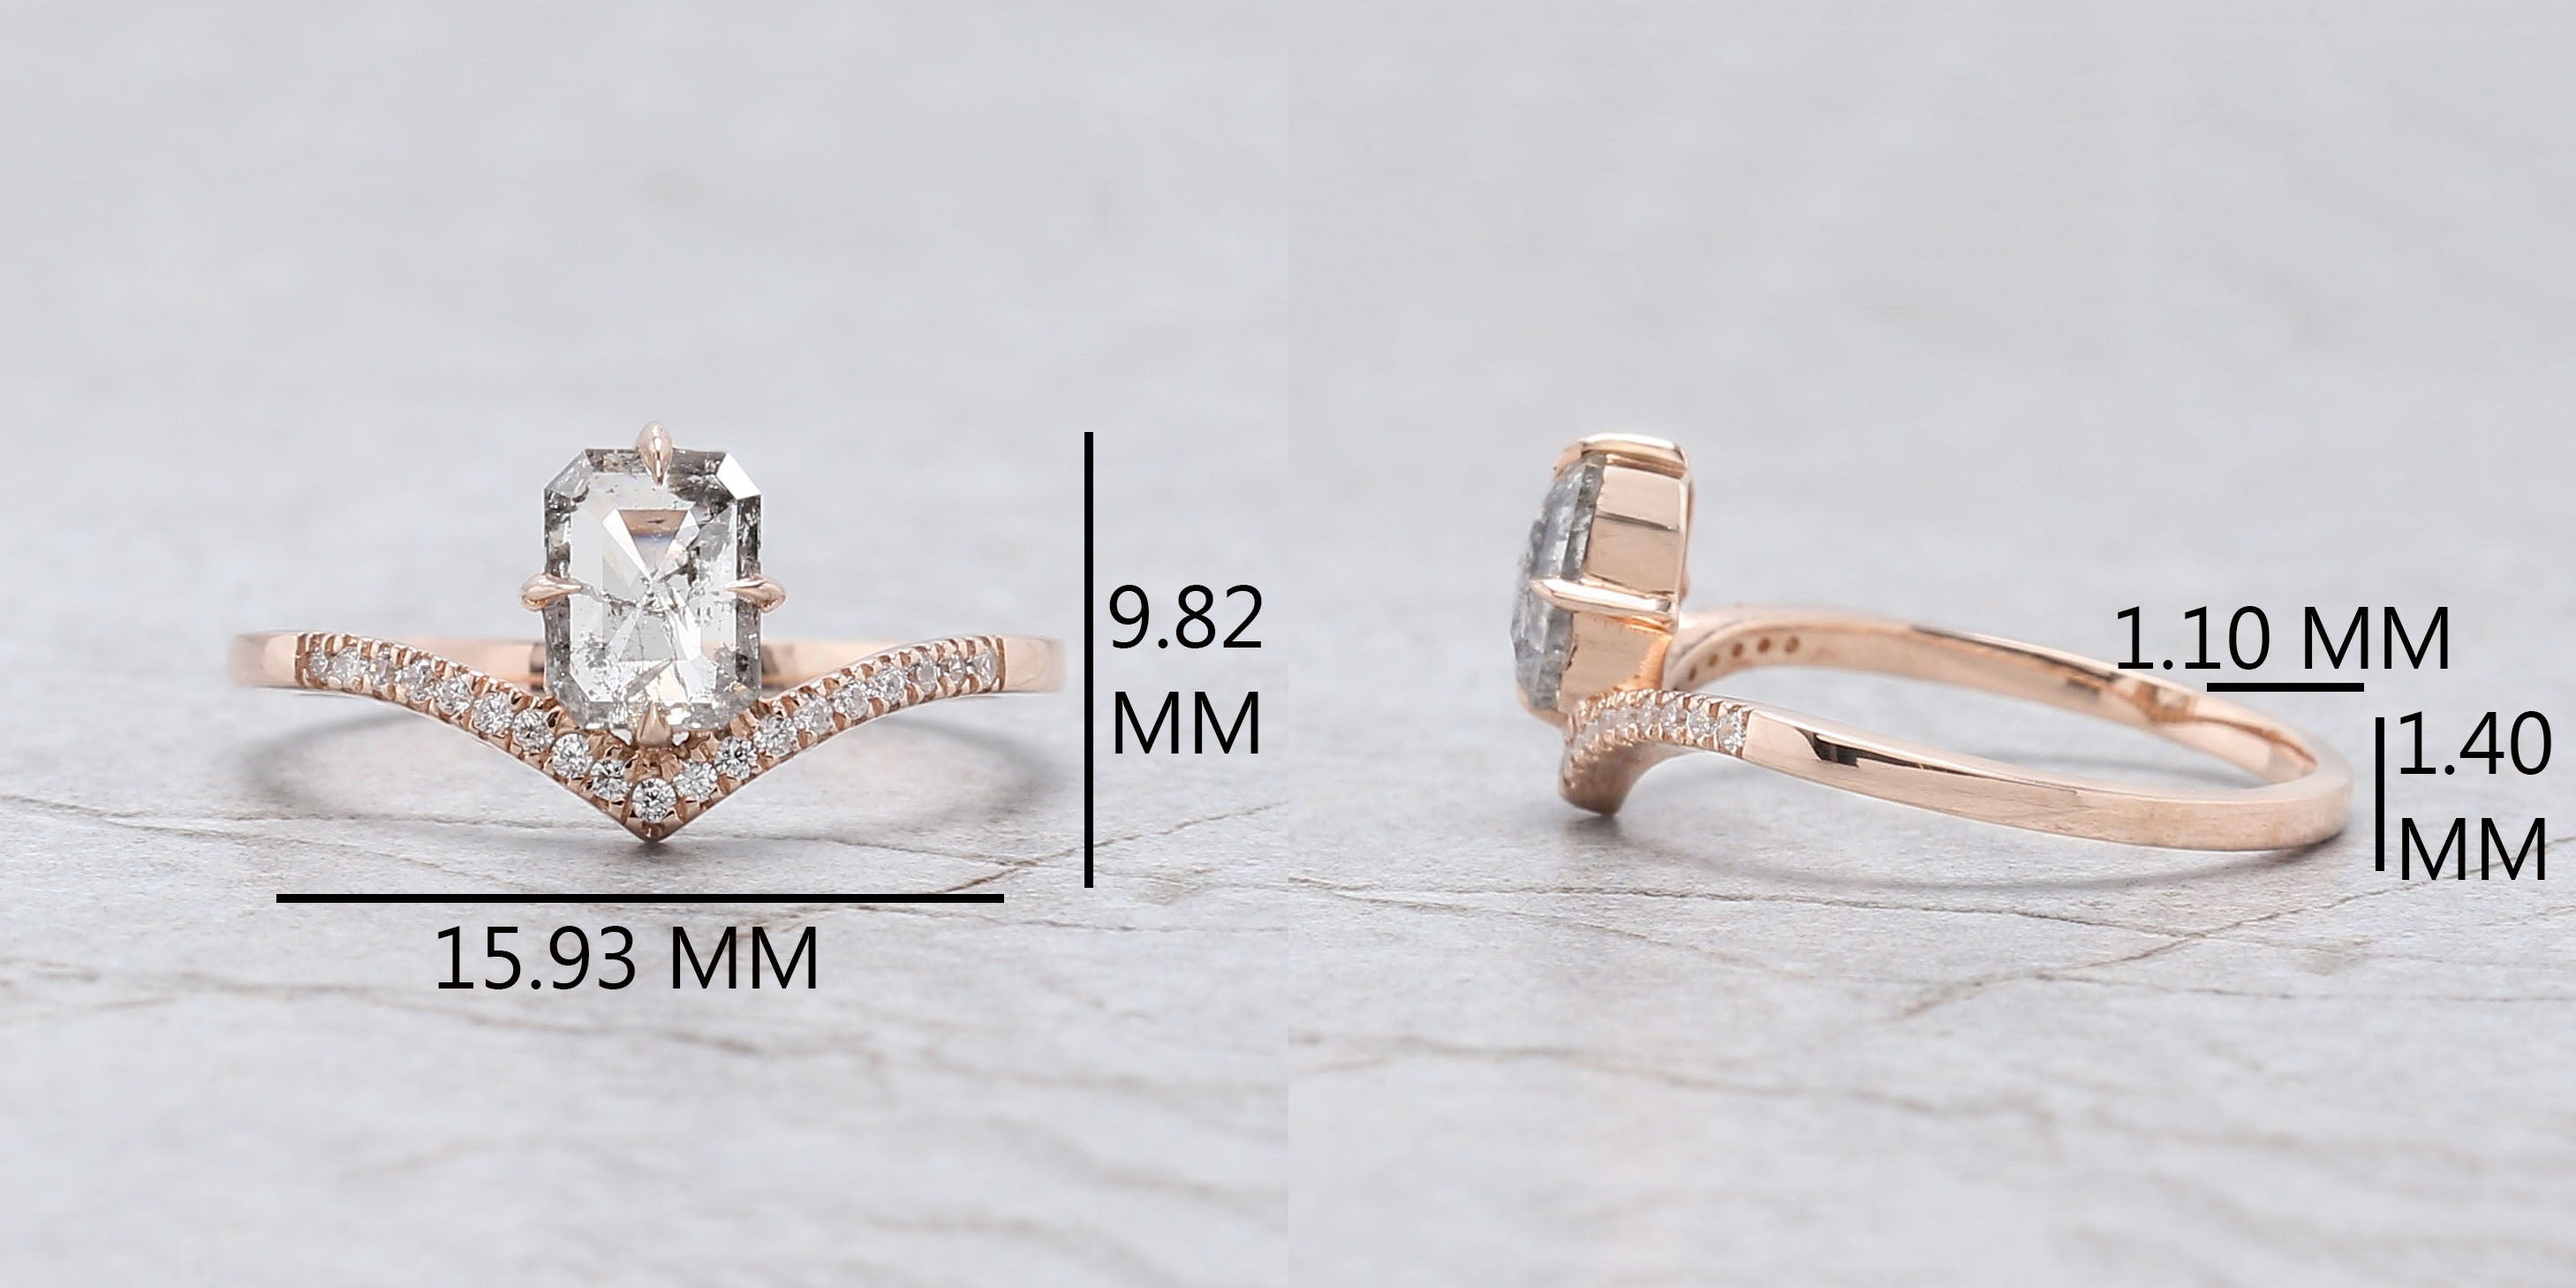 Emerald Cut Salt And Pepper Diamond Ring 0.74 Ct 6.30 MM Emerald Diamond Ring 14K Rose Gold Silver Engagement Ring Gift For Her QL8434